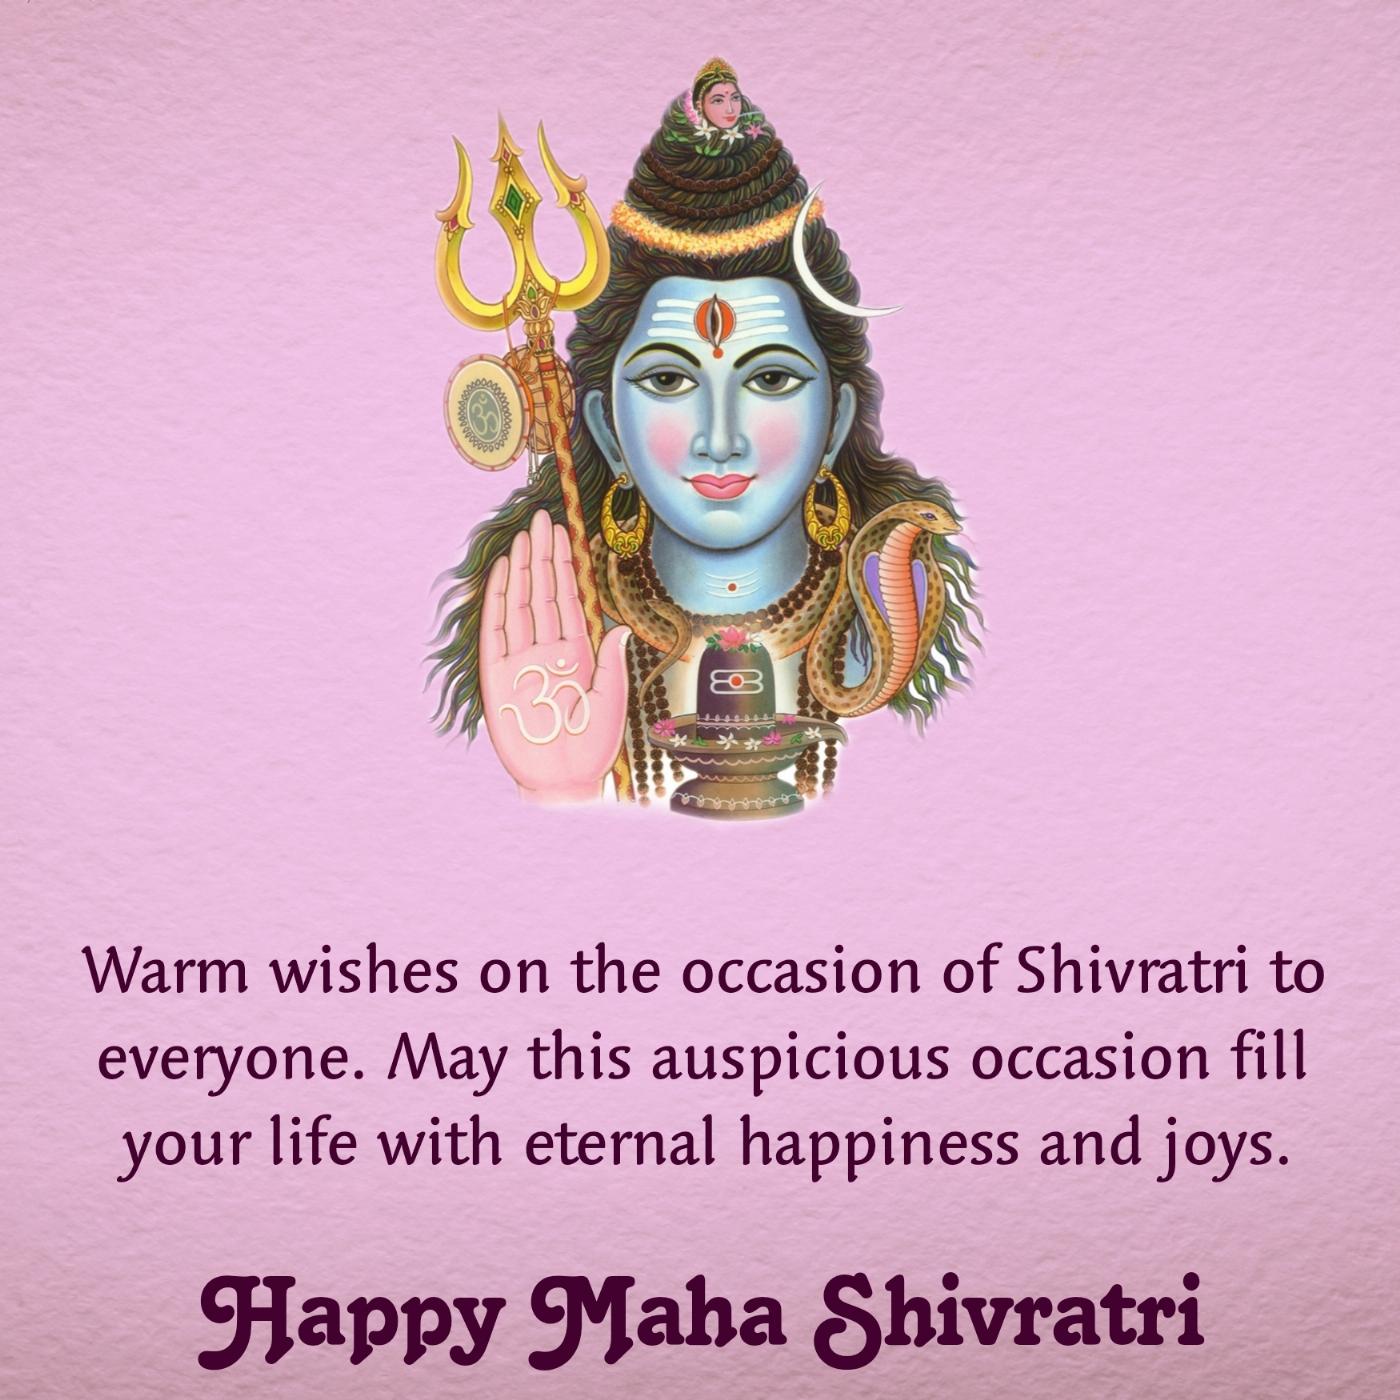 Warm wishes on the occasion of Shivratri to everyone